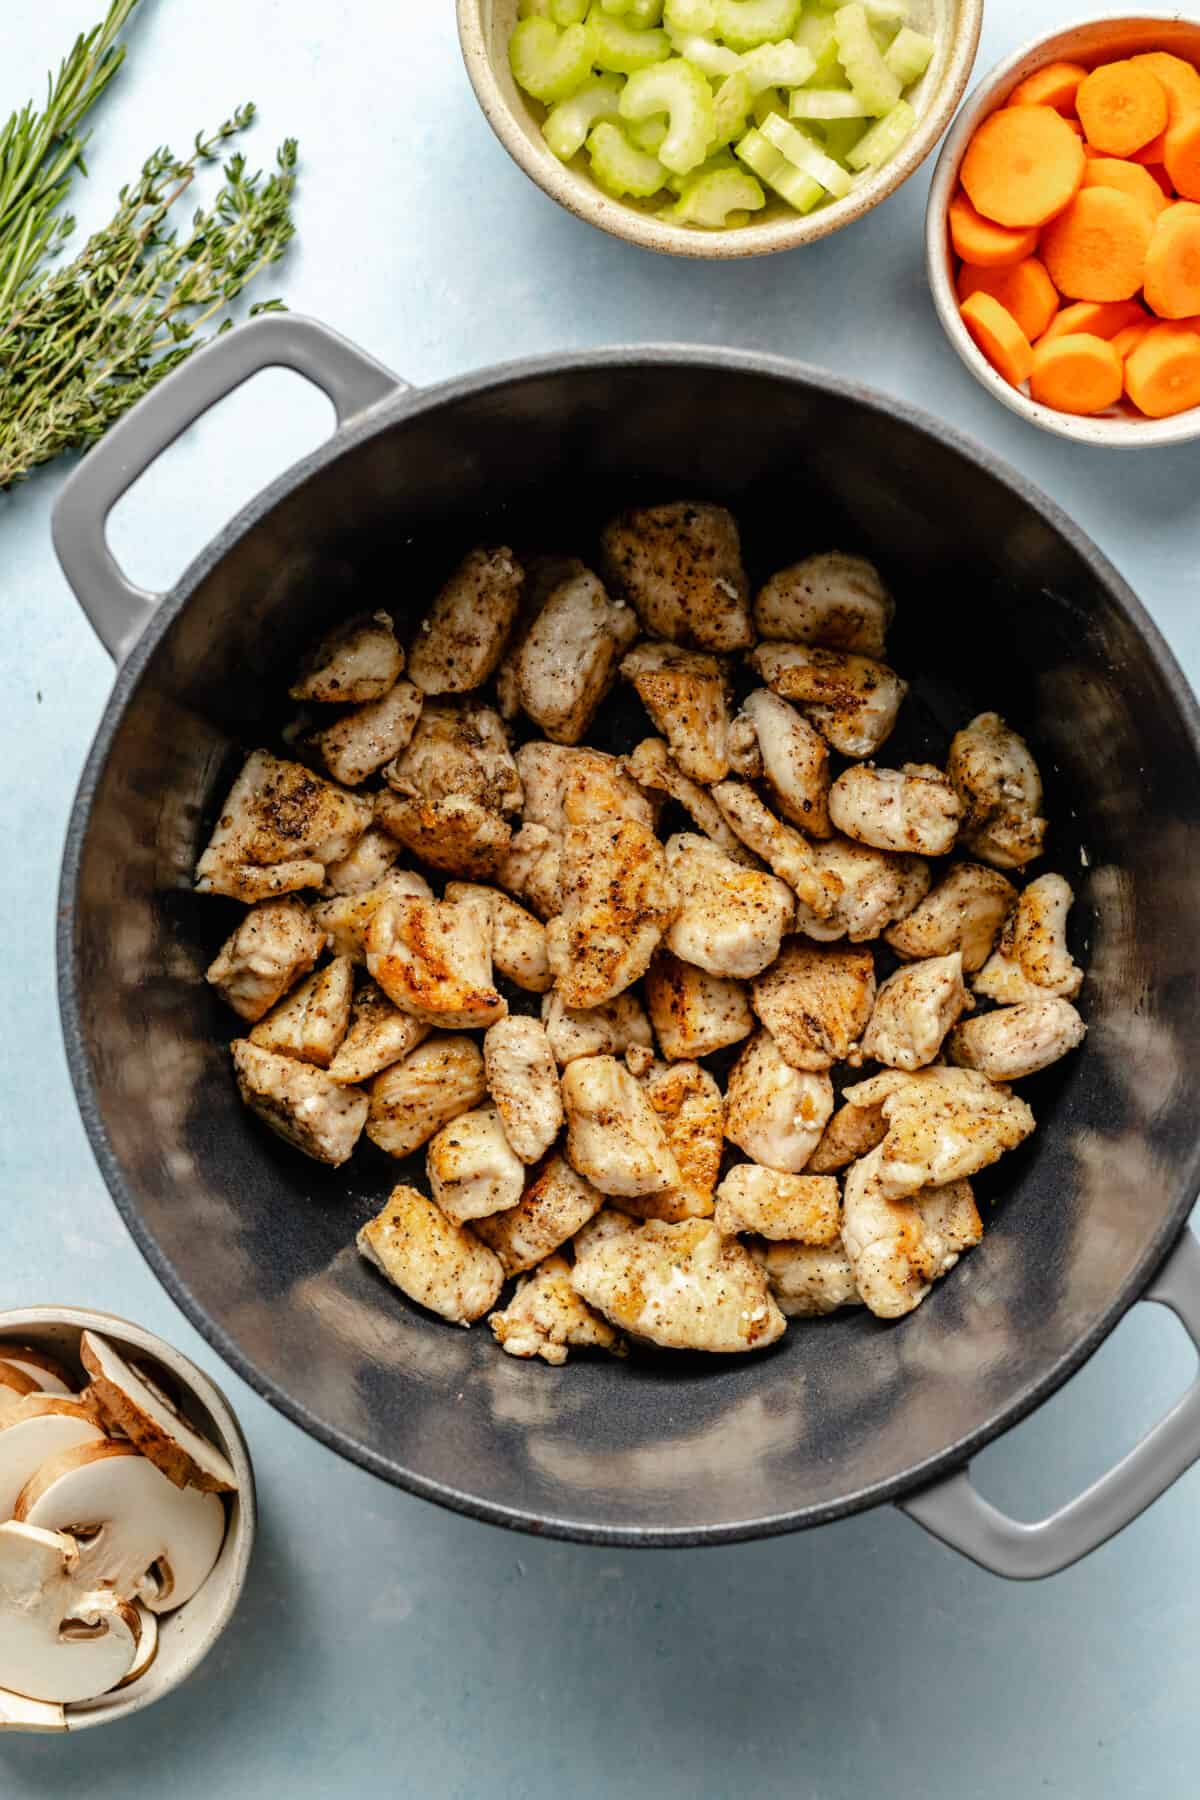 Cut chicken browned in large, dark dutch oven.. Bowls of celery and carrots in the corner of the photo.